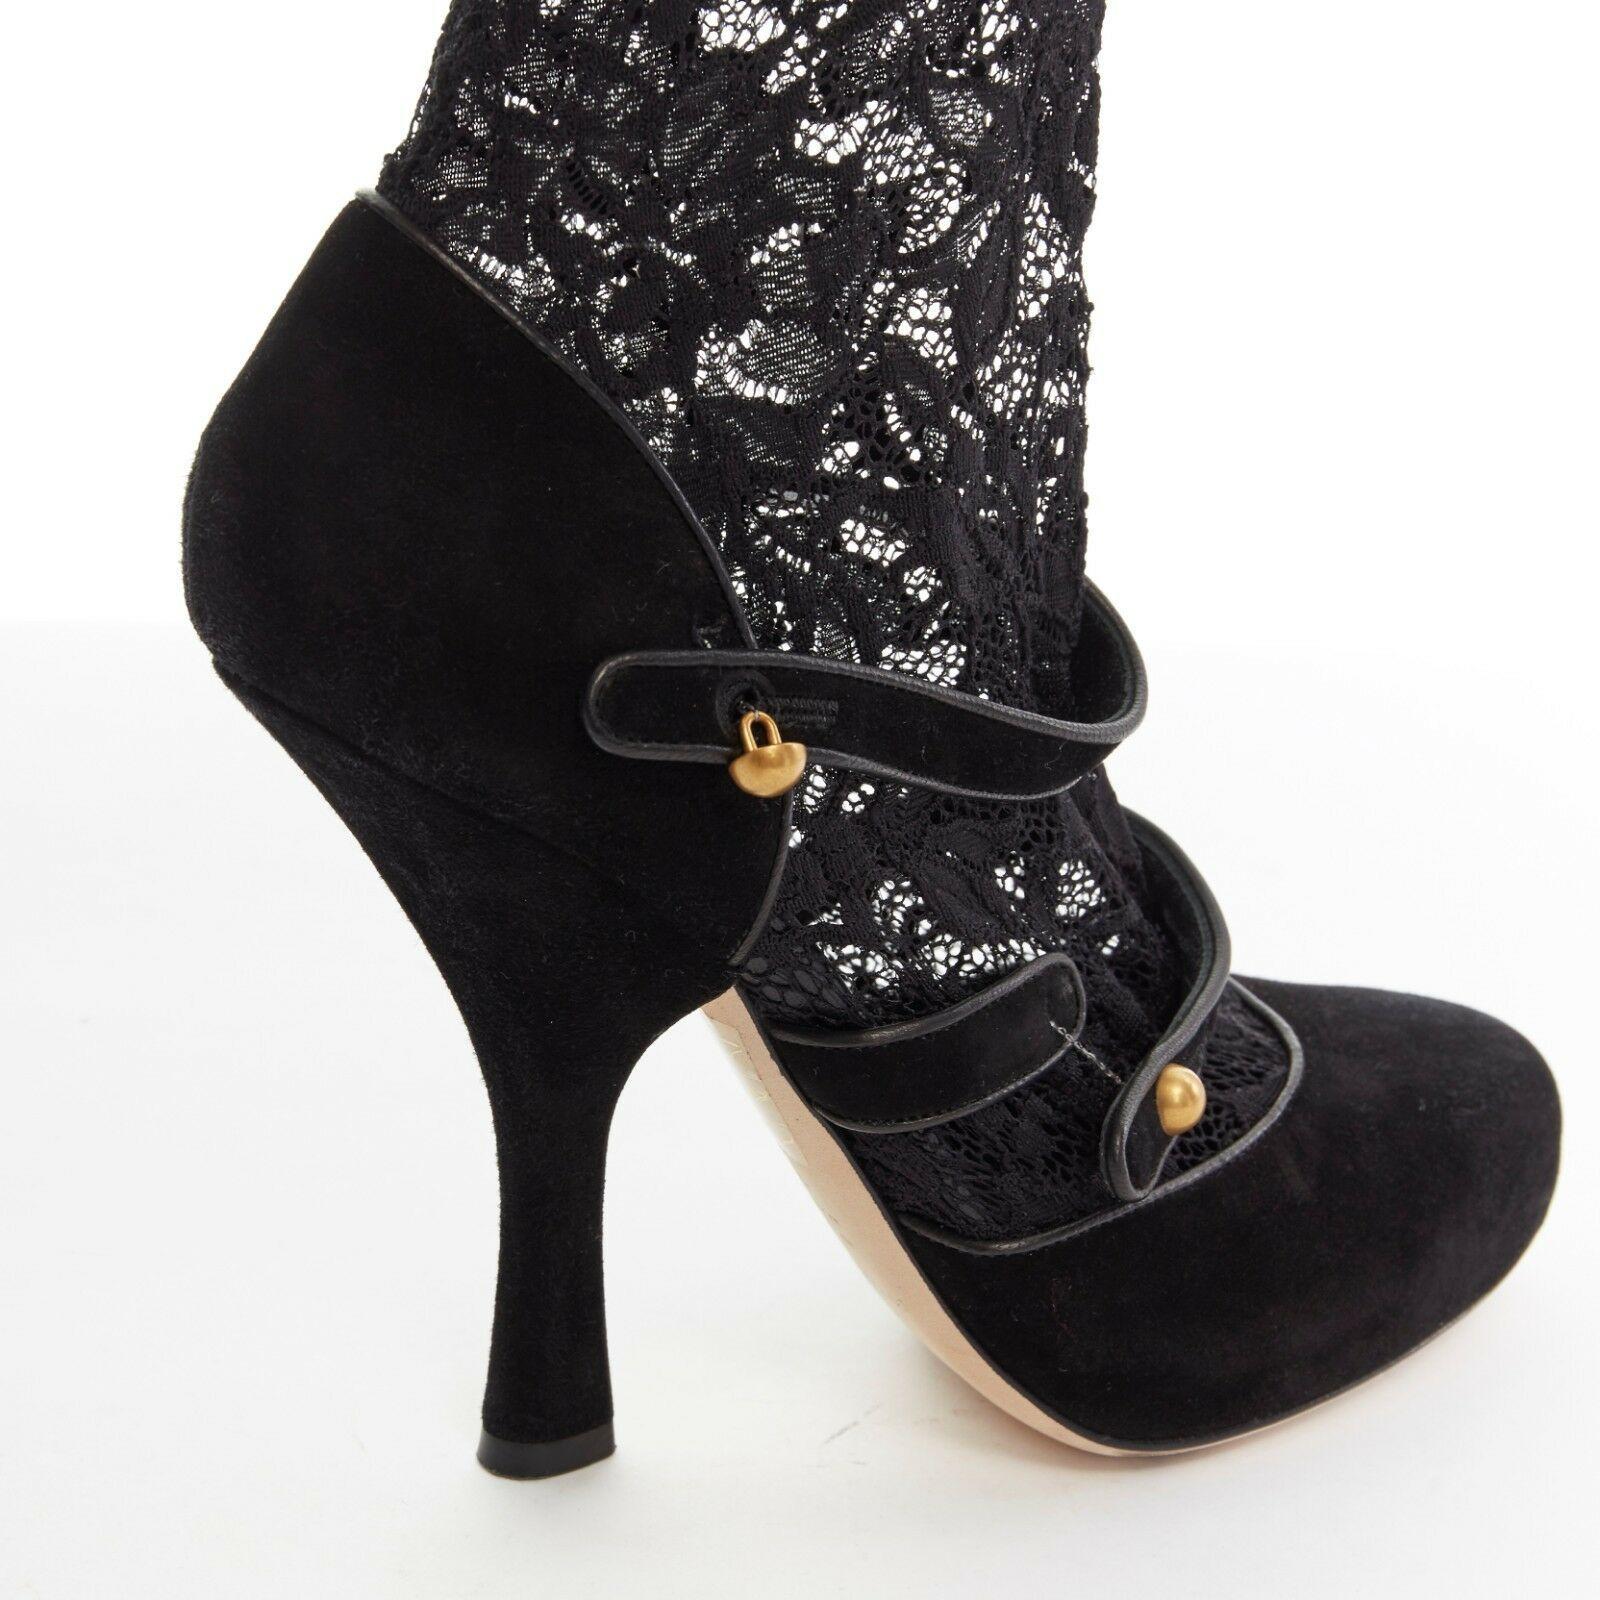 DOLCE GABBANA black suede leather floral lace sock strappy high heel EU38 US8 4